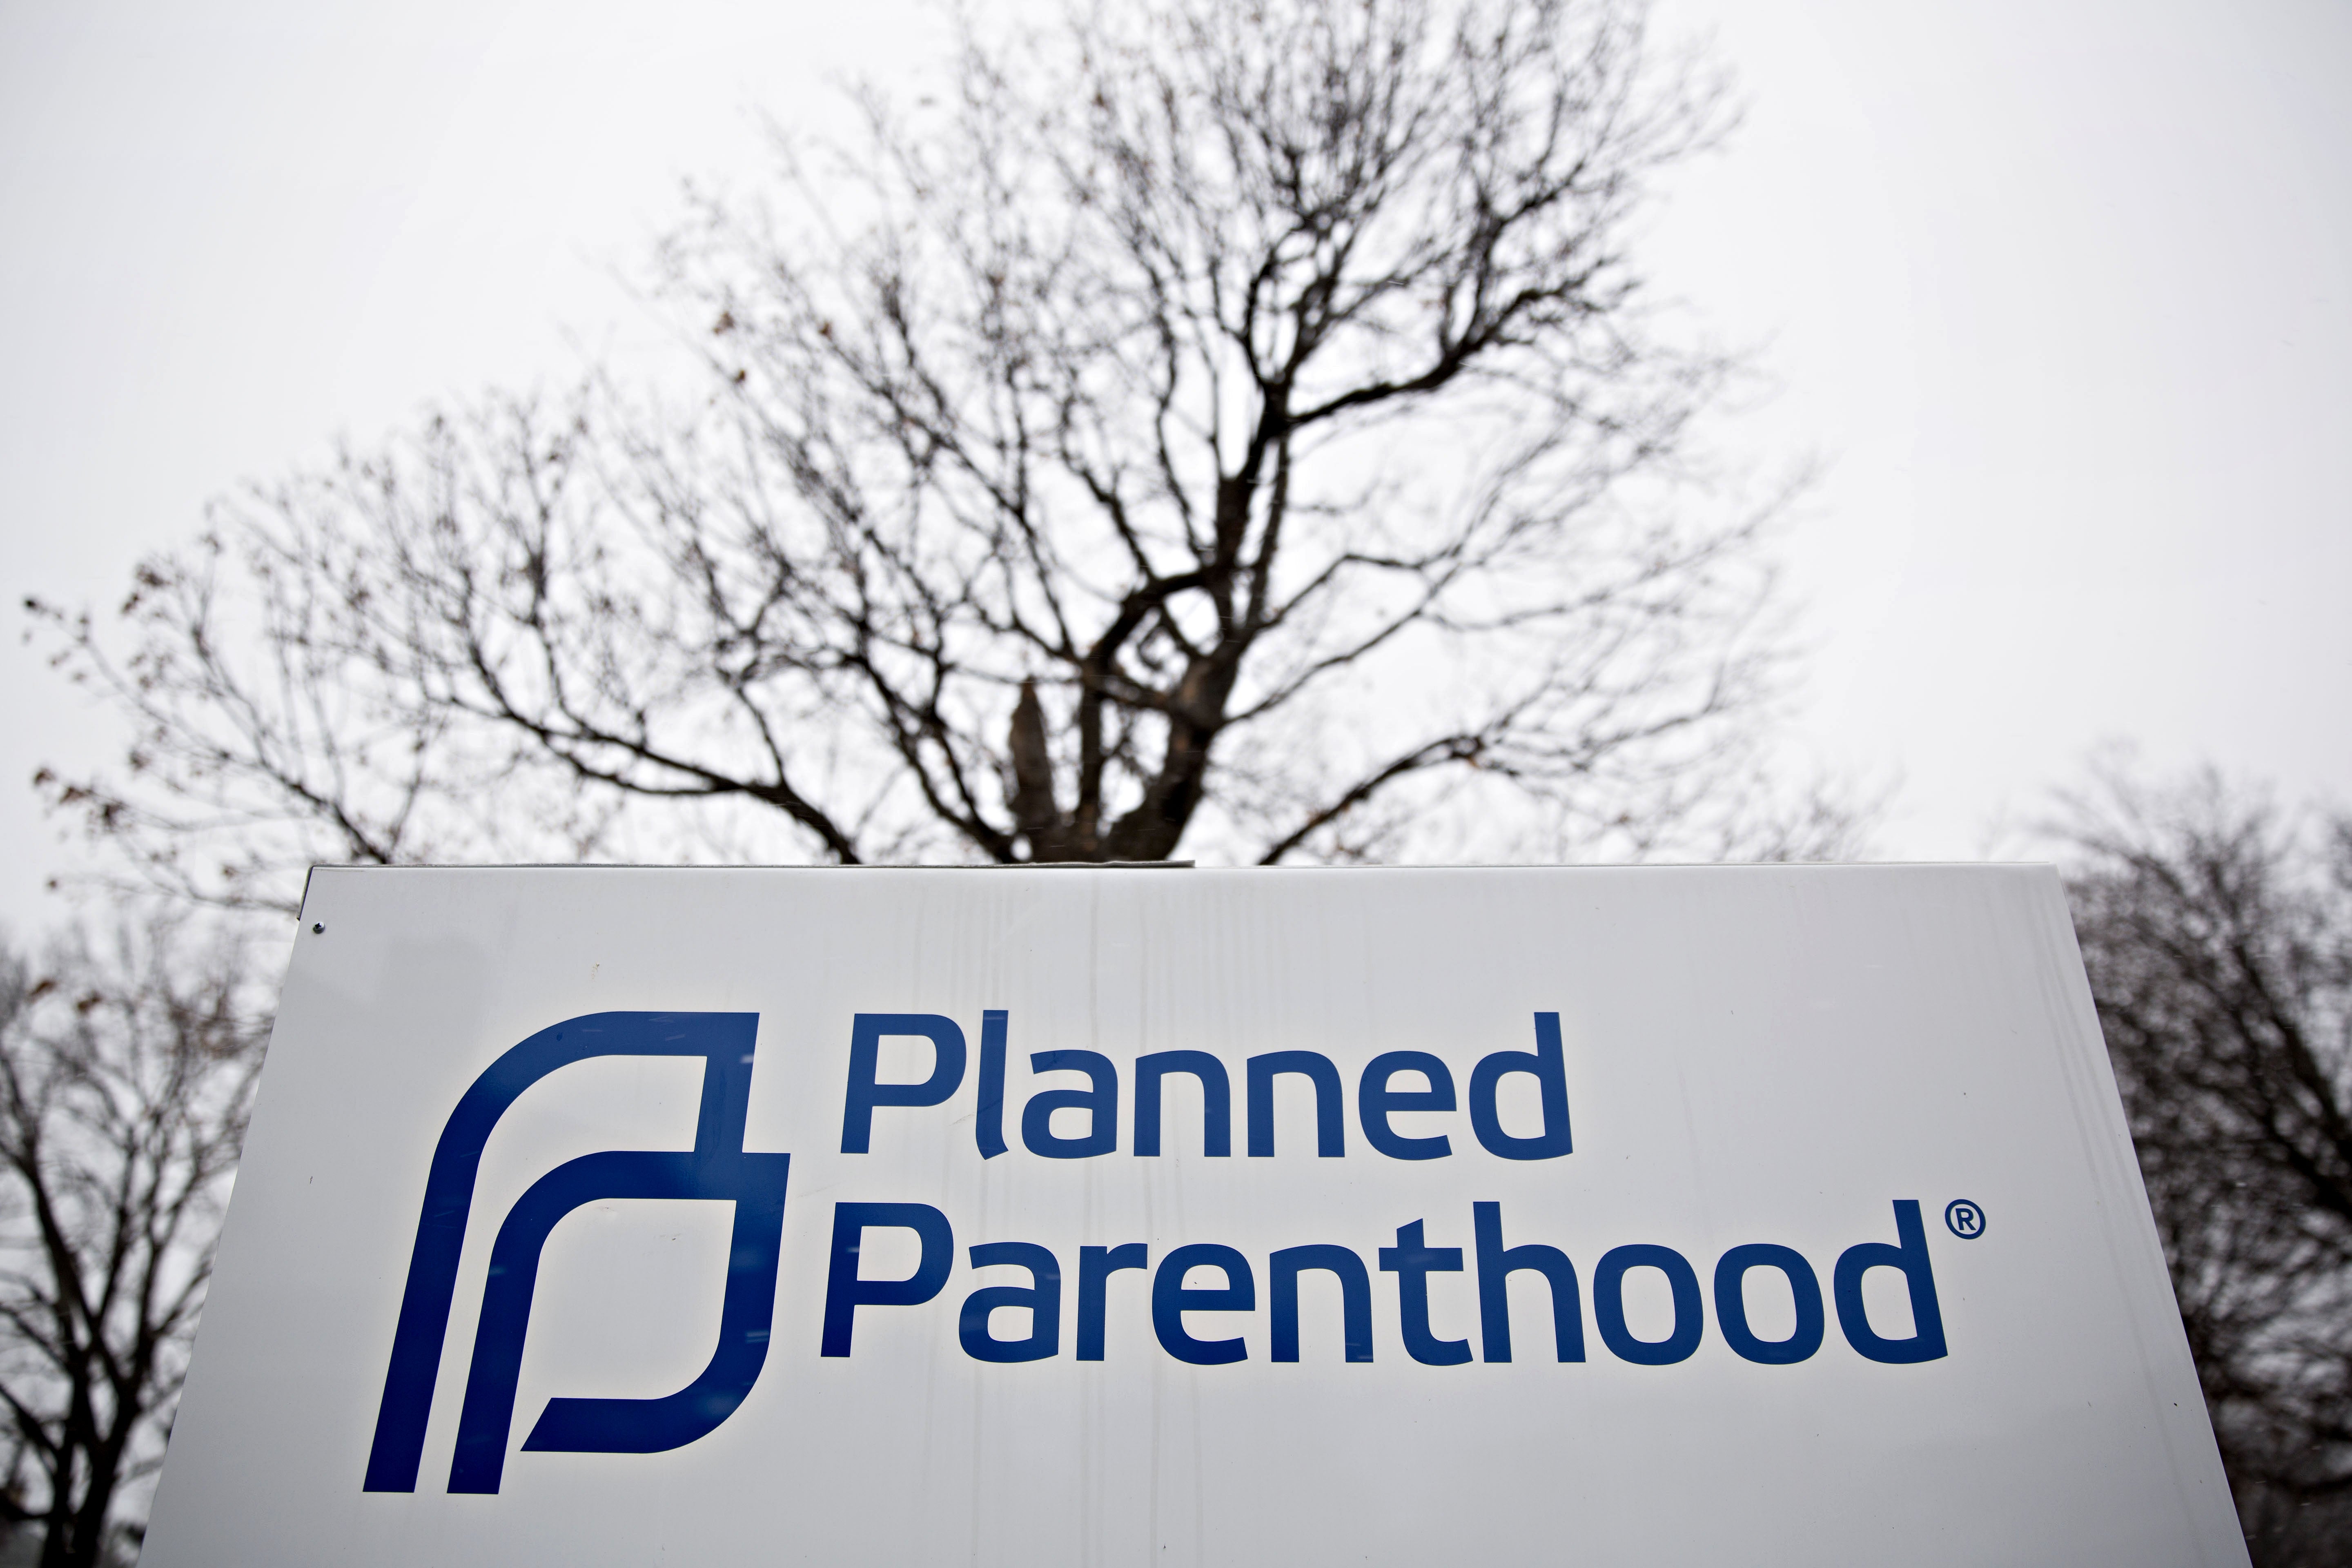 White House Threatens To Defund Planned Parenthood If They Don’t Stop Abortions